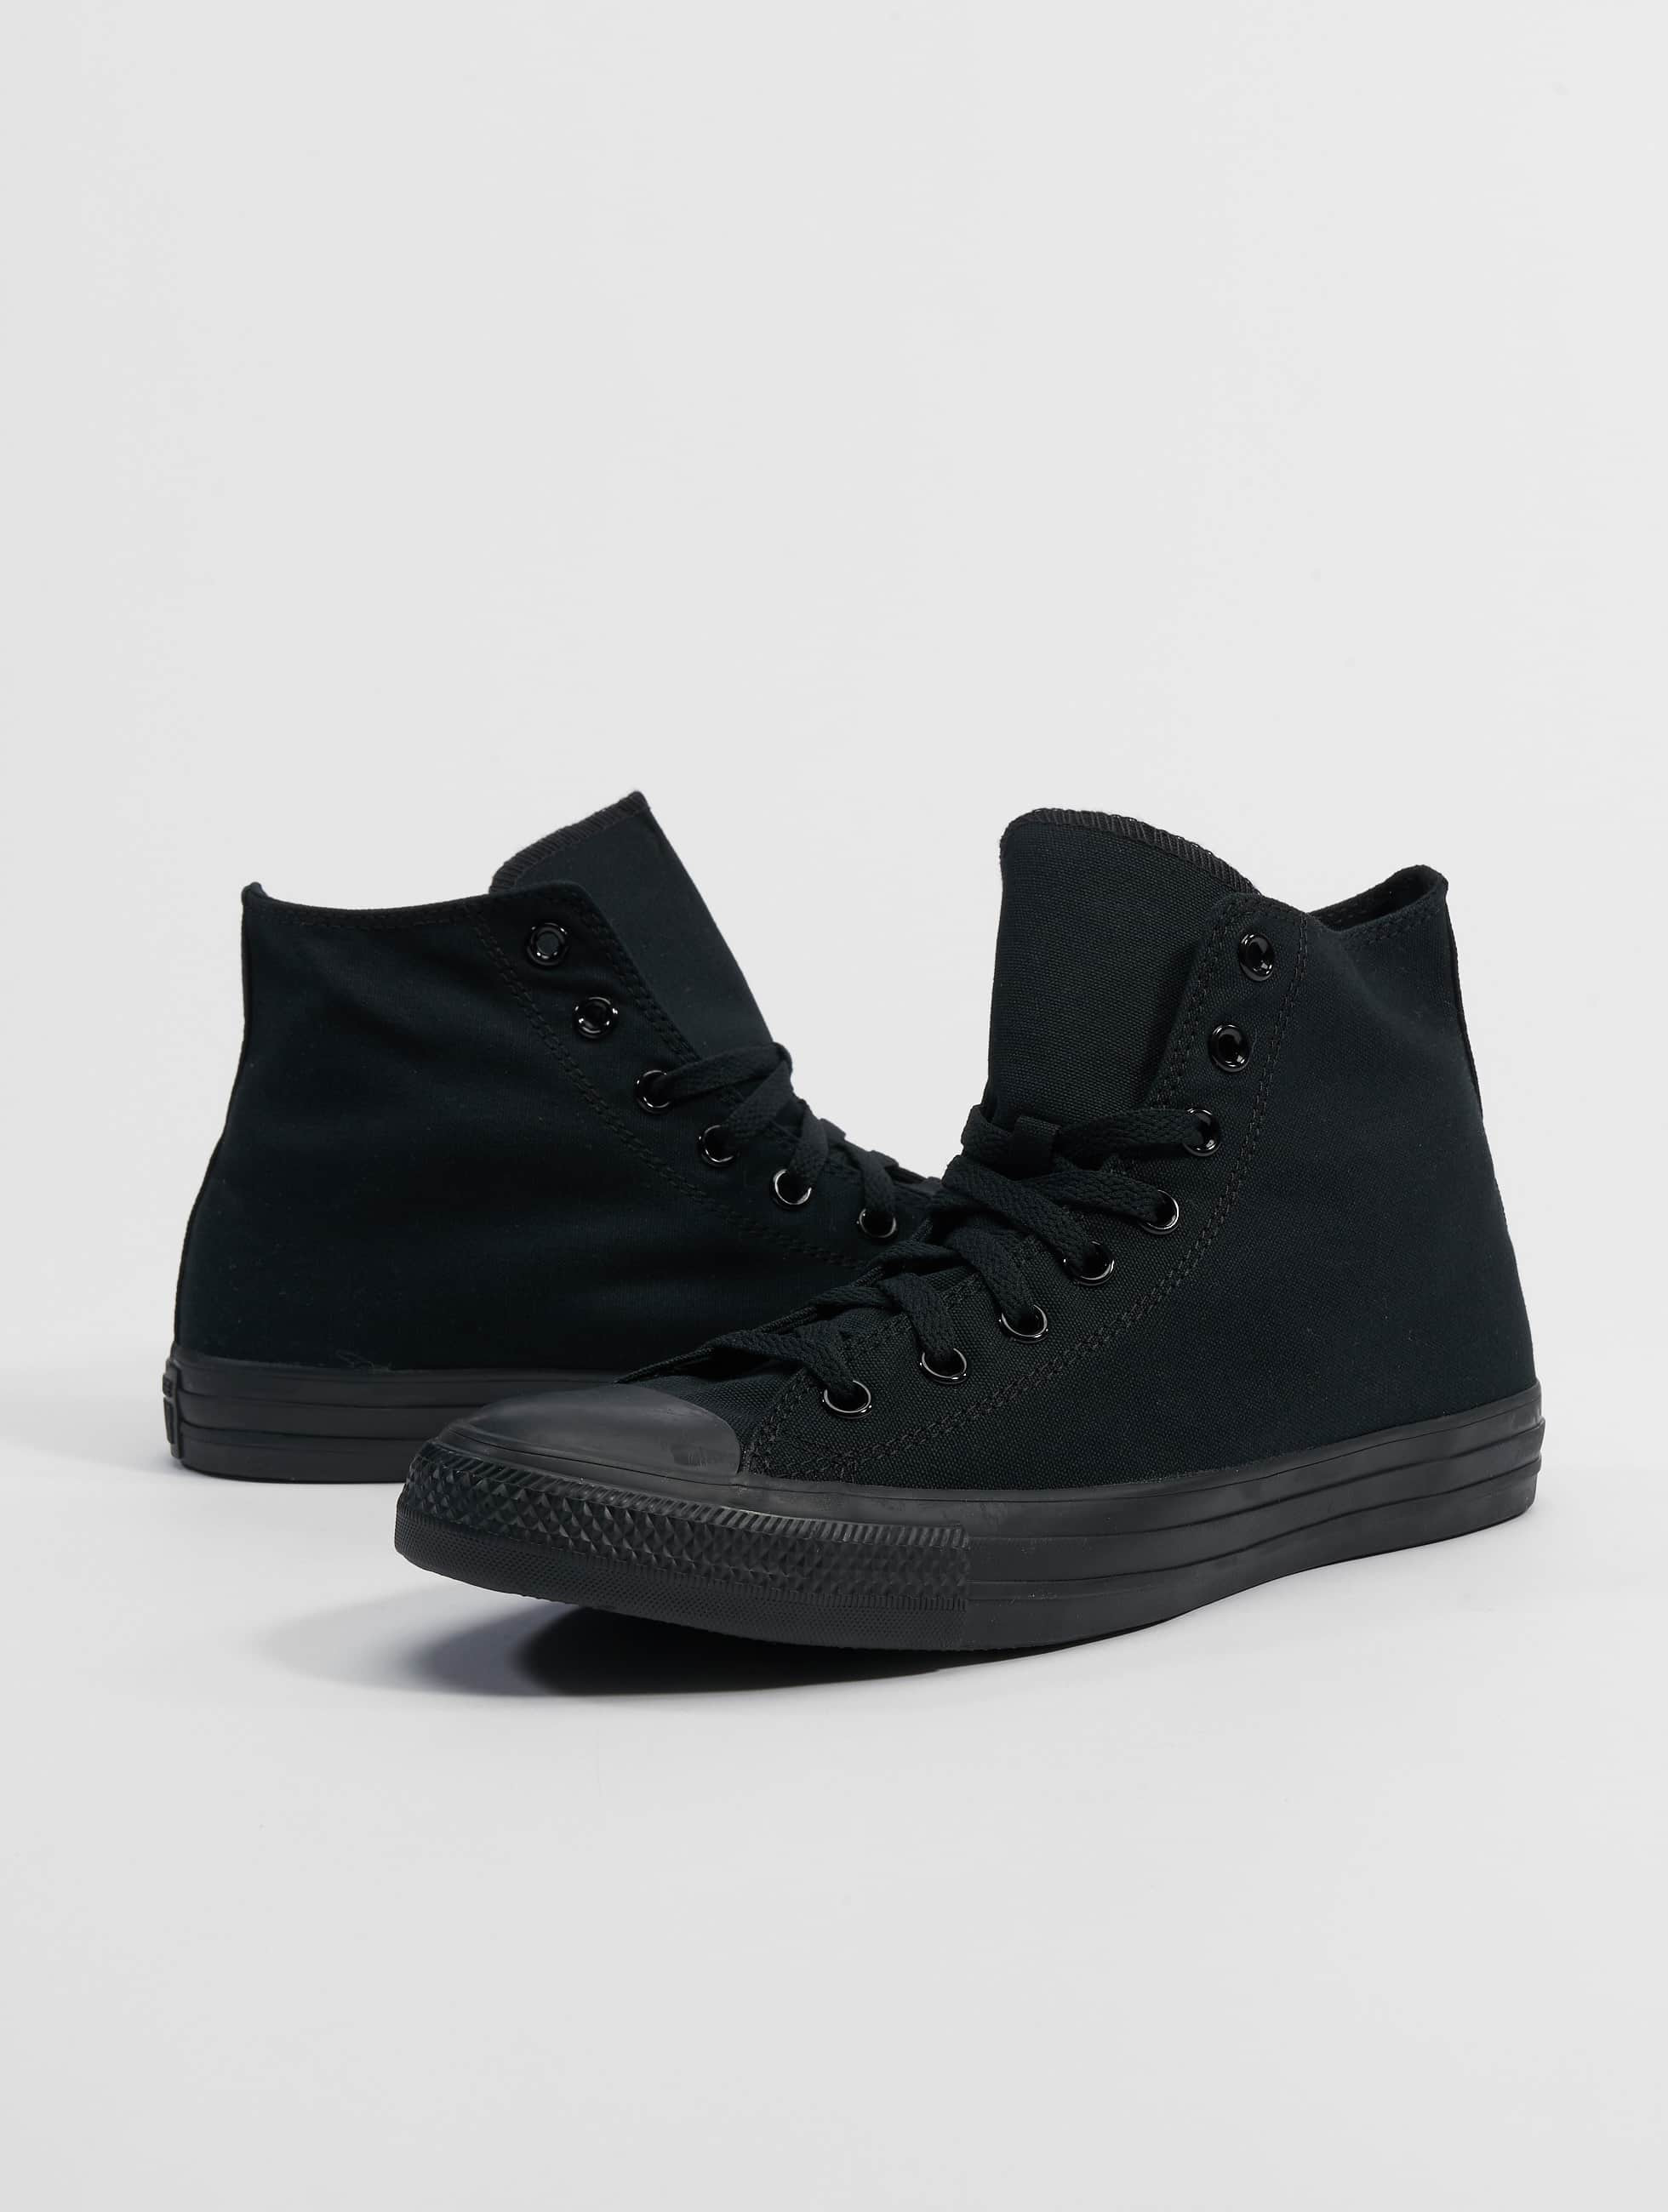 Converse Shoe / Sneakers Chuck Taylor All Star High in black 156901